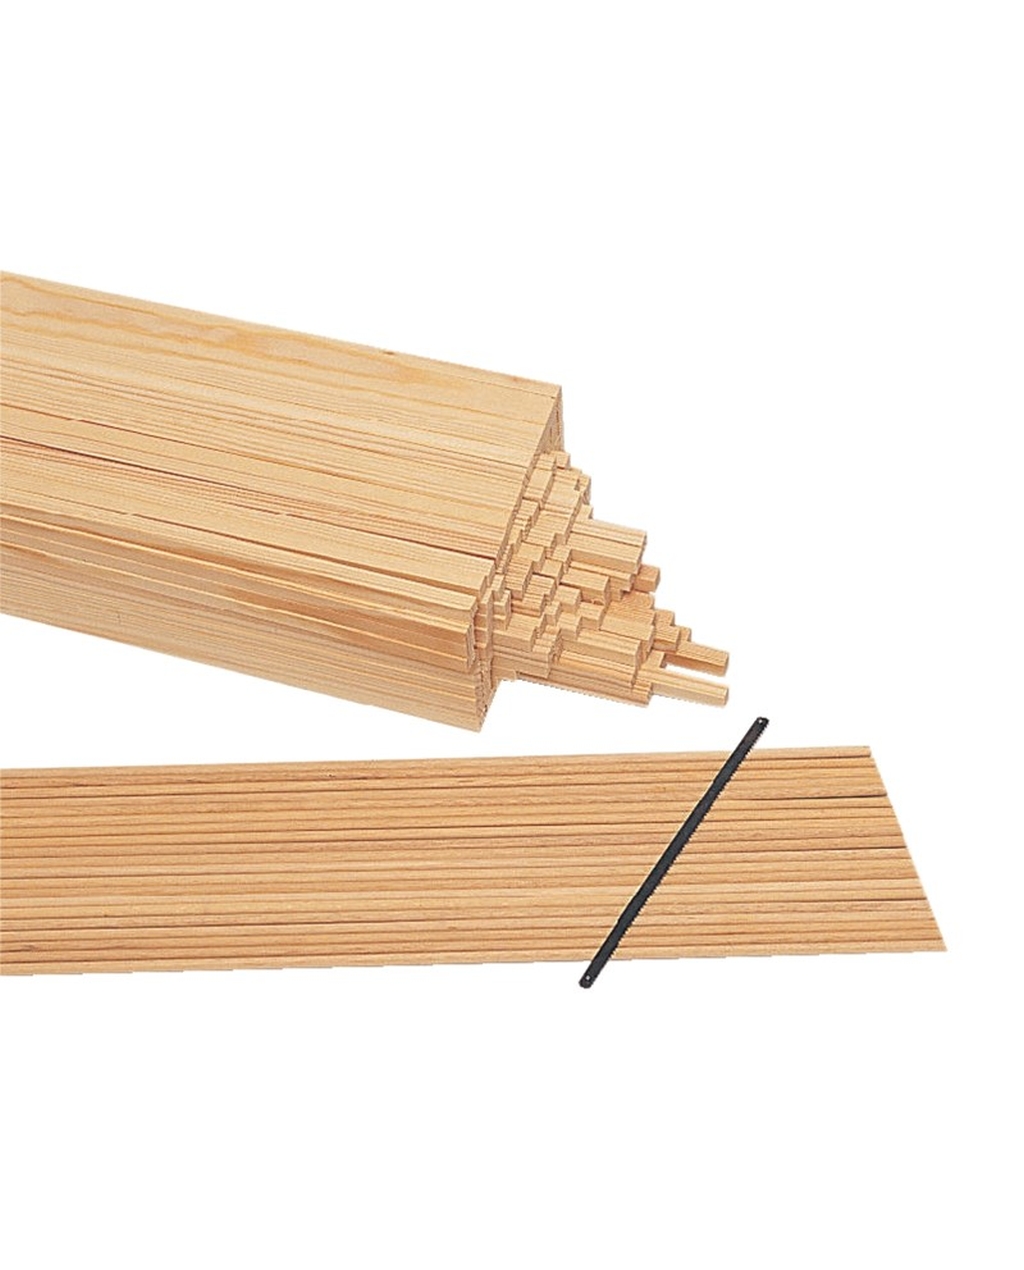 Primary Wood Pack Westcare Education Supply Shop